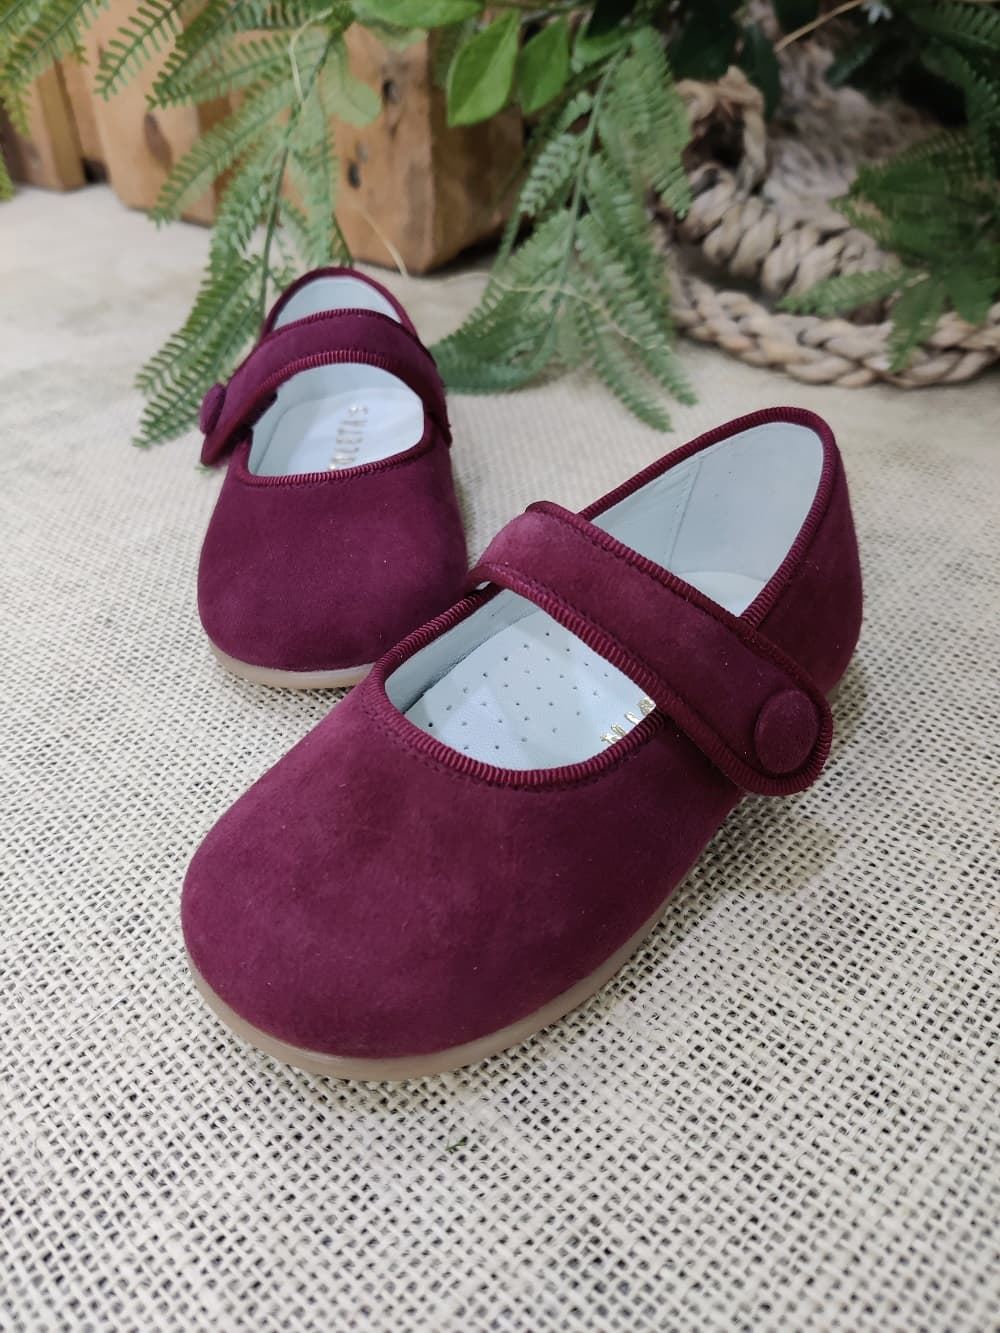 Pirufin (Piruflex) Mary Janes for baby girls in Bordeaux suede - Image 5